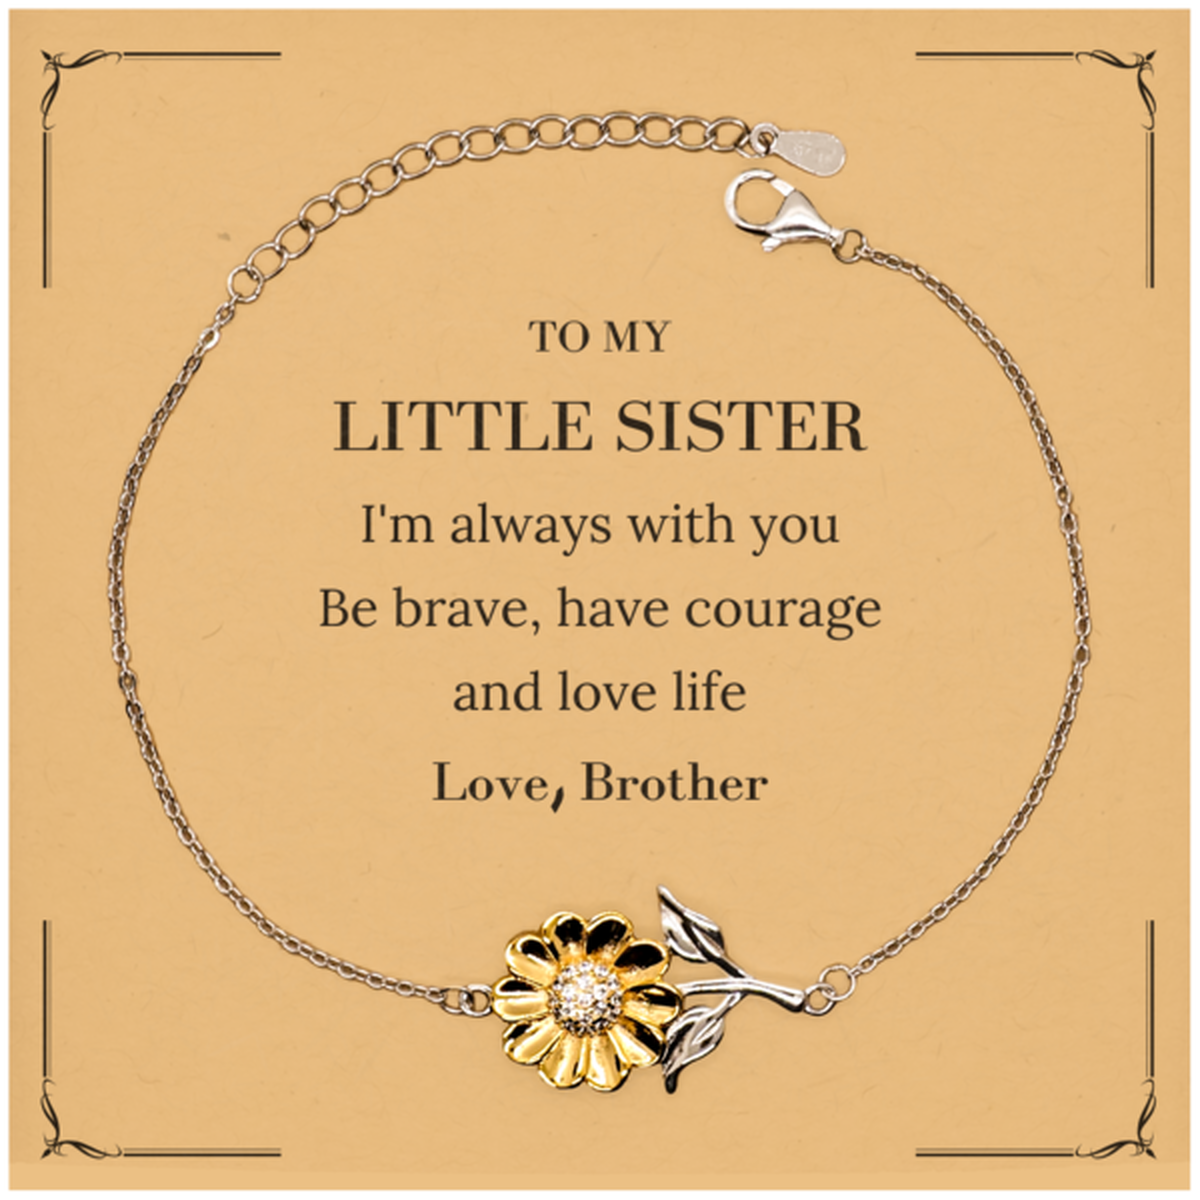 To My Little Sister Gifts from Brother, Unique Sunflower Bracelet Inspirational Christmas Birthday Graduation Gifts for Little Sister I'm always with you. Be brave, have courage and love life. Love, Brother